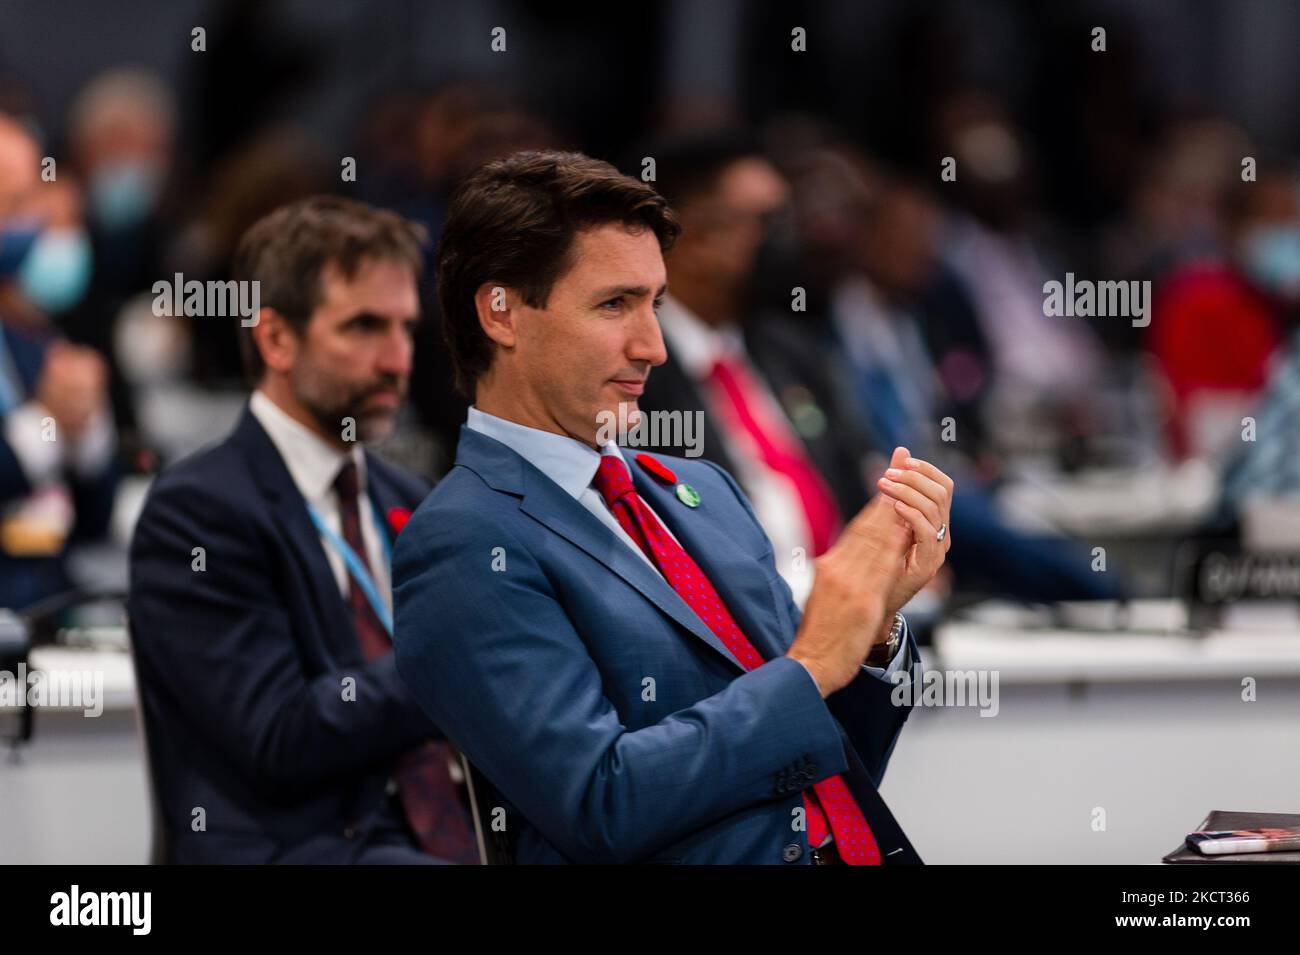 Canada's Prime Minister Justin Trudeau attends the opening ceremony of the UN Climate Change Conference COP26 in Glasgow, United Kingdom, 1 November 2021. COP26, running from October 31 to November 12 in Glasgow will be the biggest climate conference since the 2015 Paris summit and is seen as crucial in setting worldwide emission targets to slow global warming, as well as firming up other key commitments. (Photo by Maciek Musialek/NurPhoto) Stock Photo